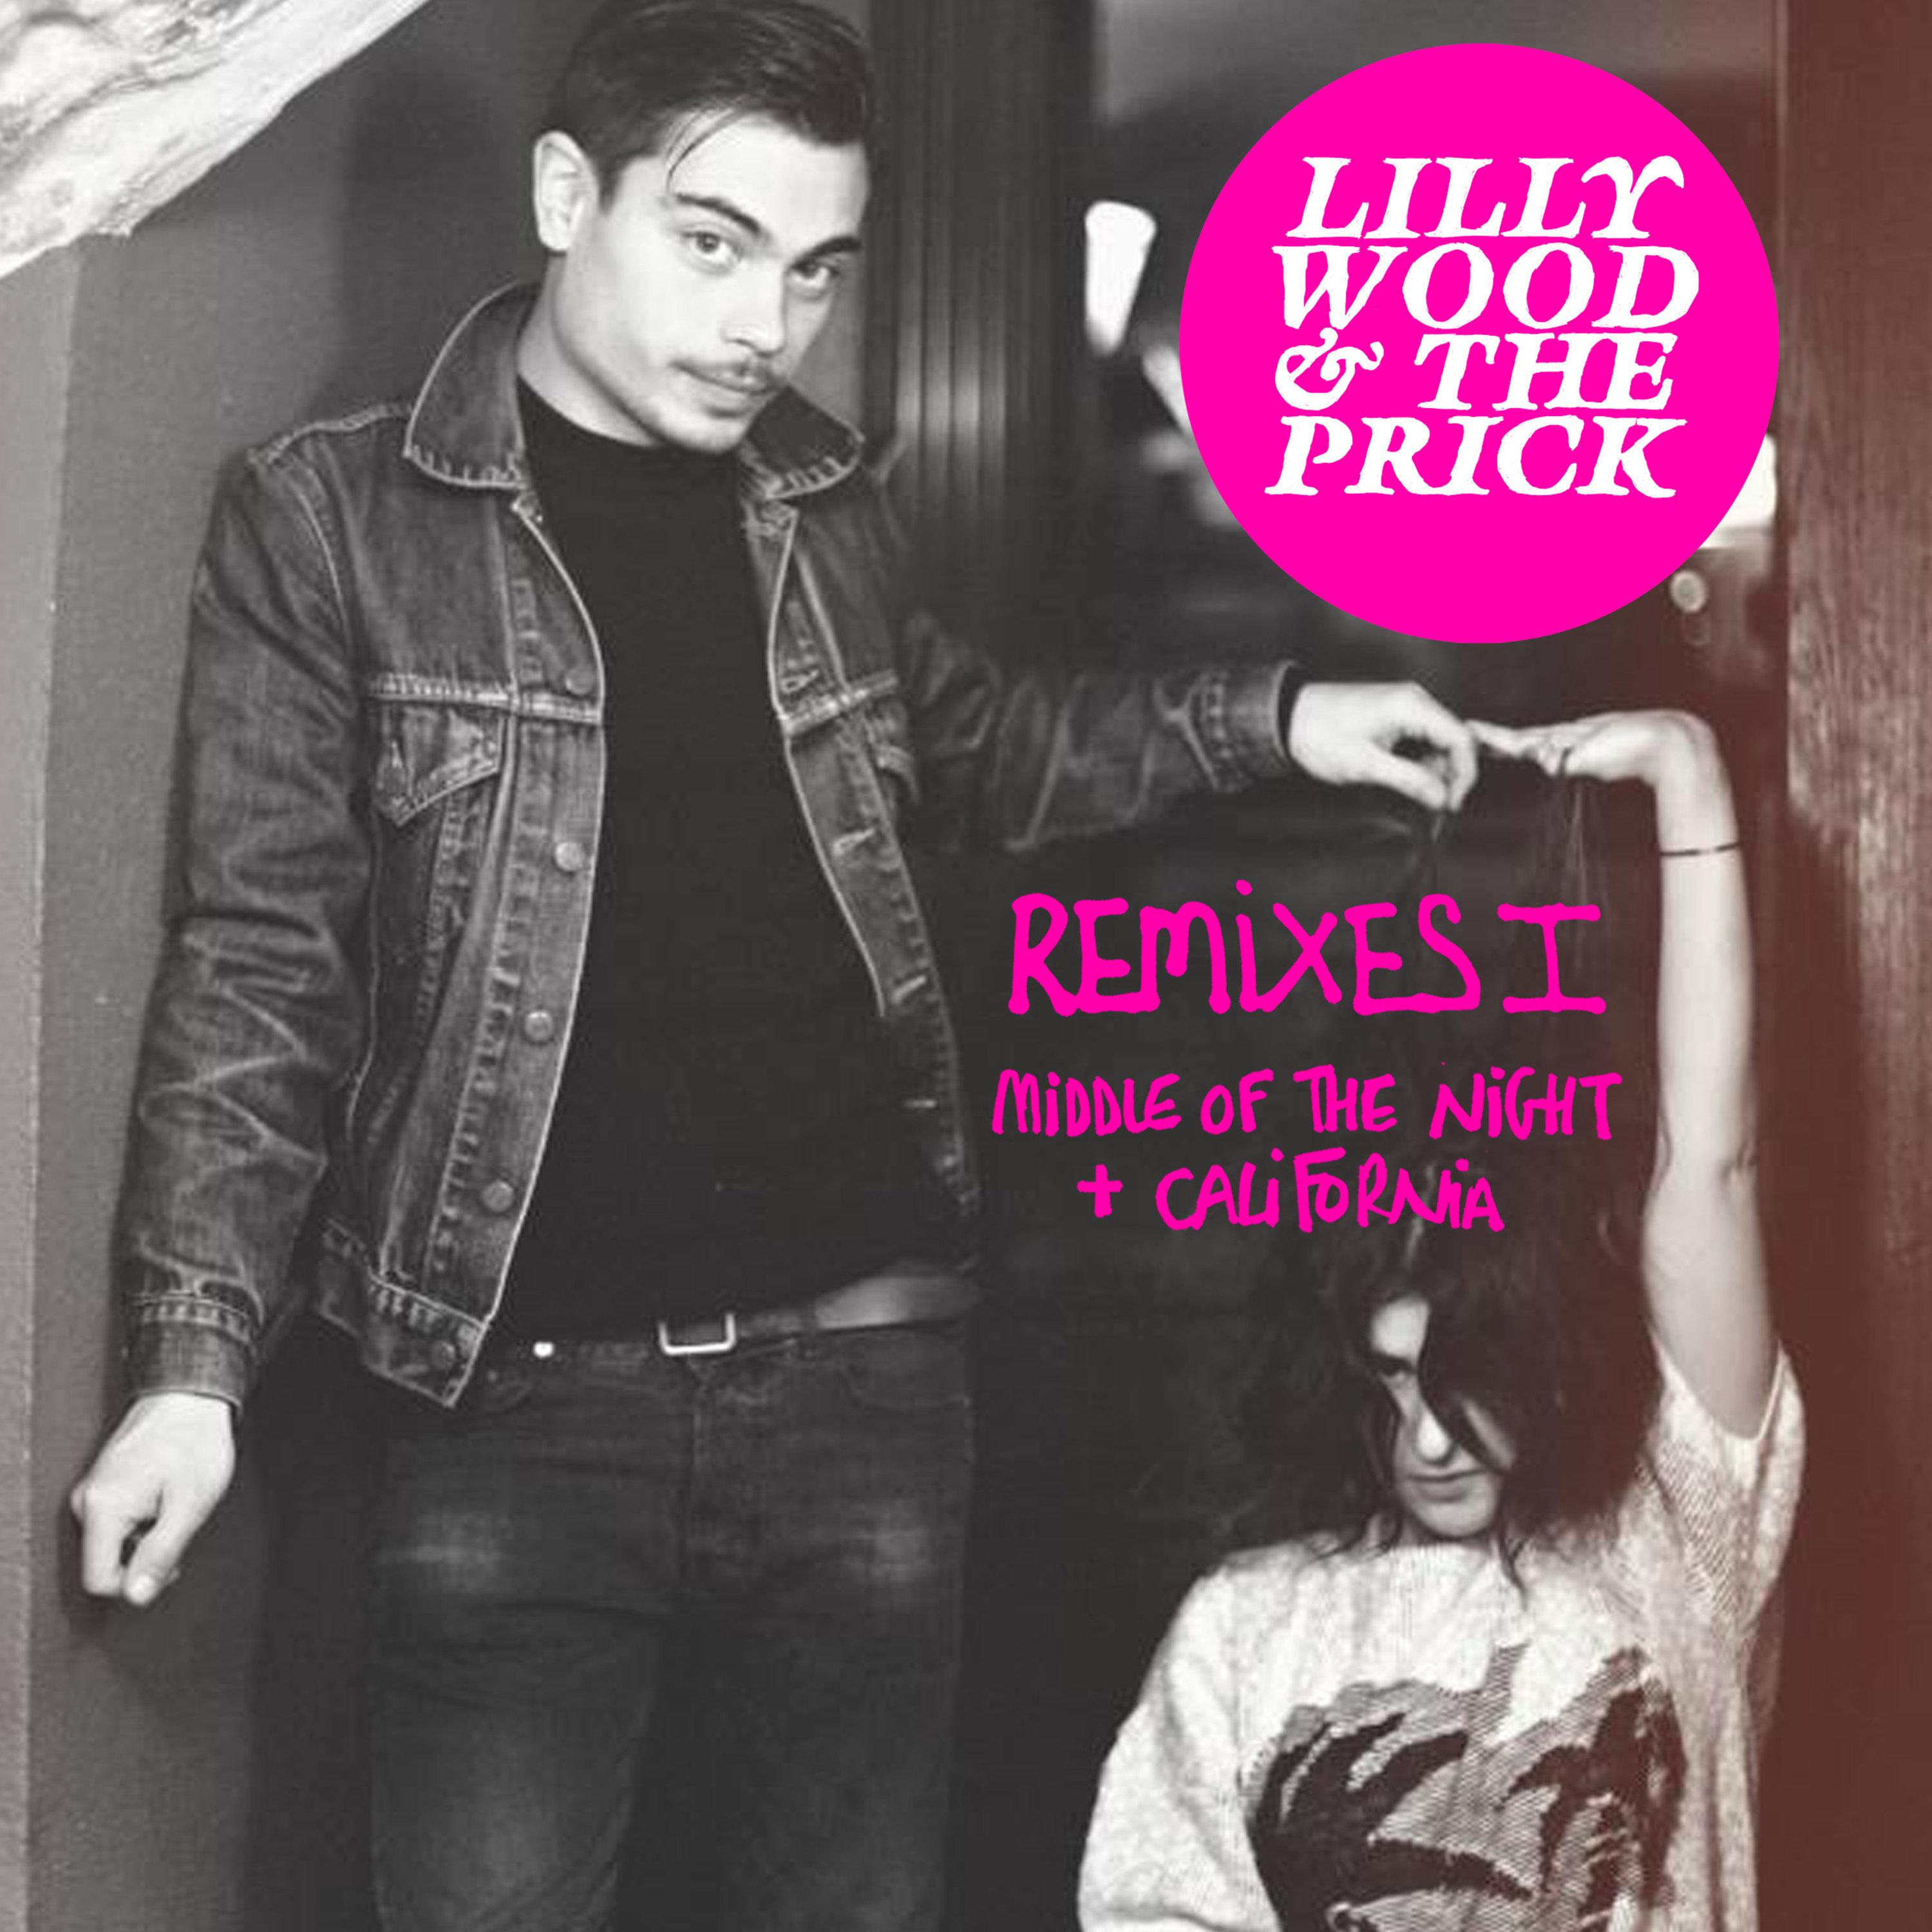 Lilly Wood & The Prick - Middle of the Night